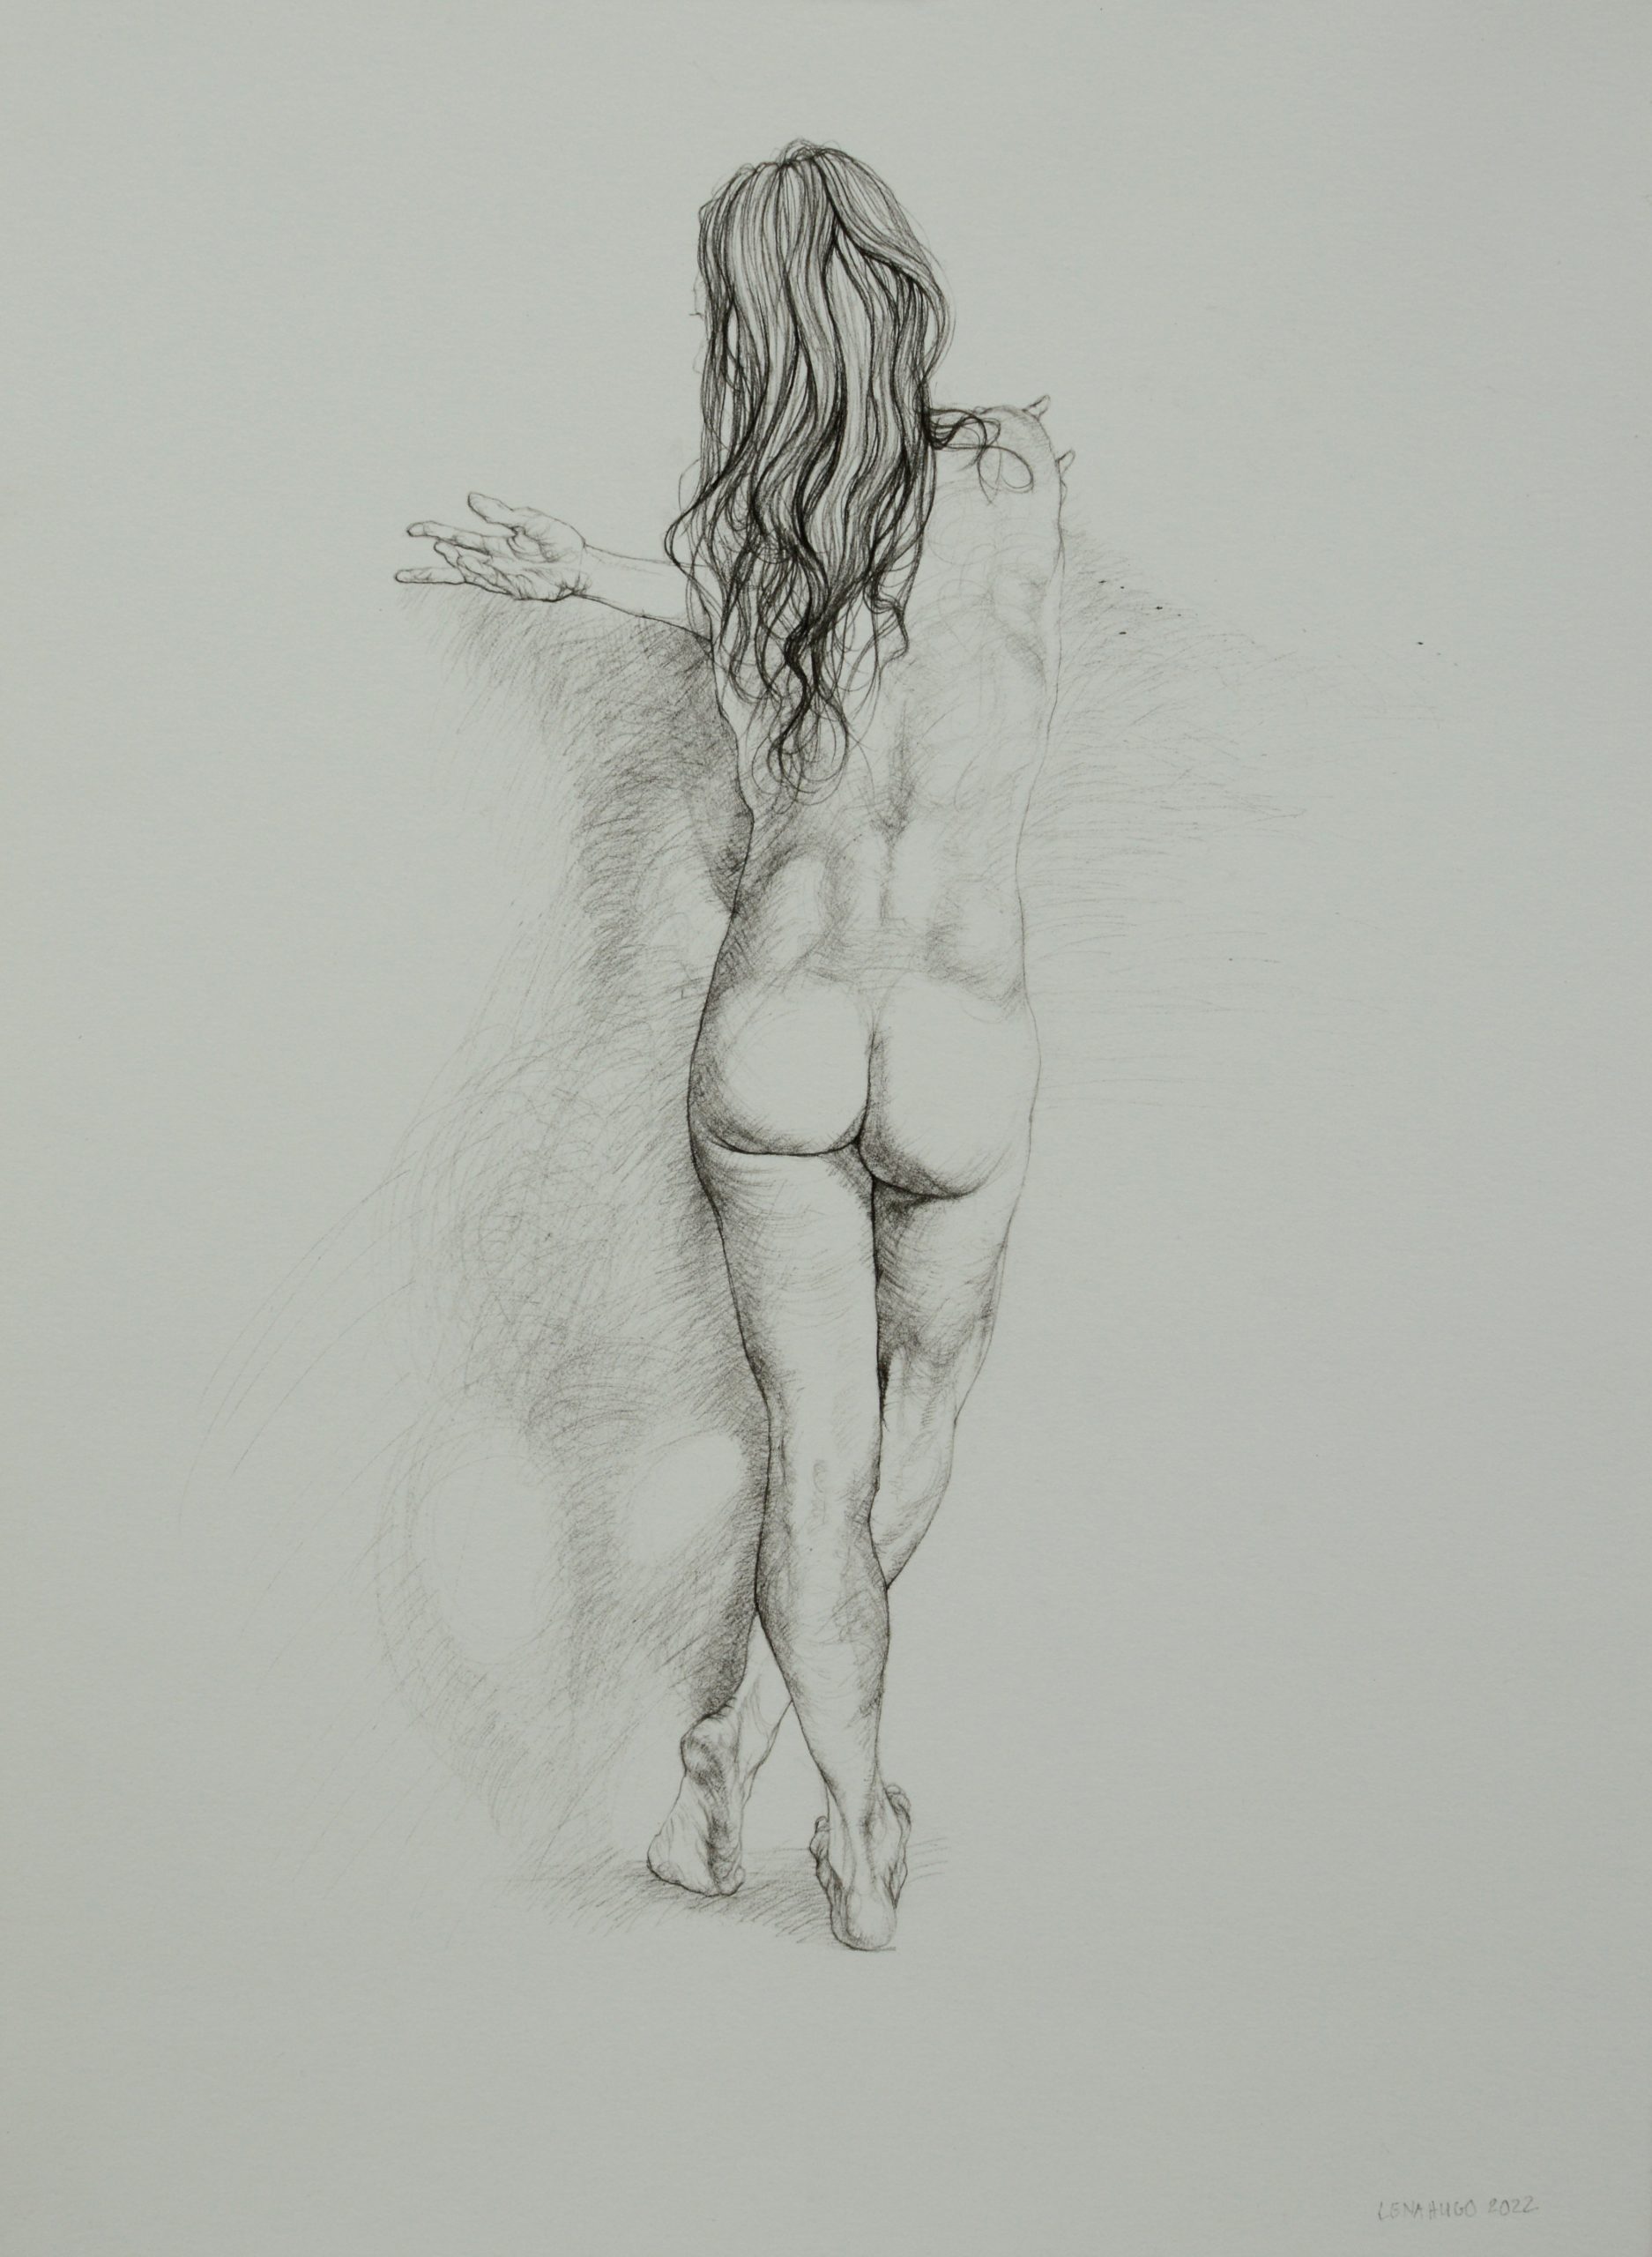 Pose as a Windswept Tree VII, 42cm x 30cm, woodless charcoal on paper